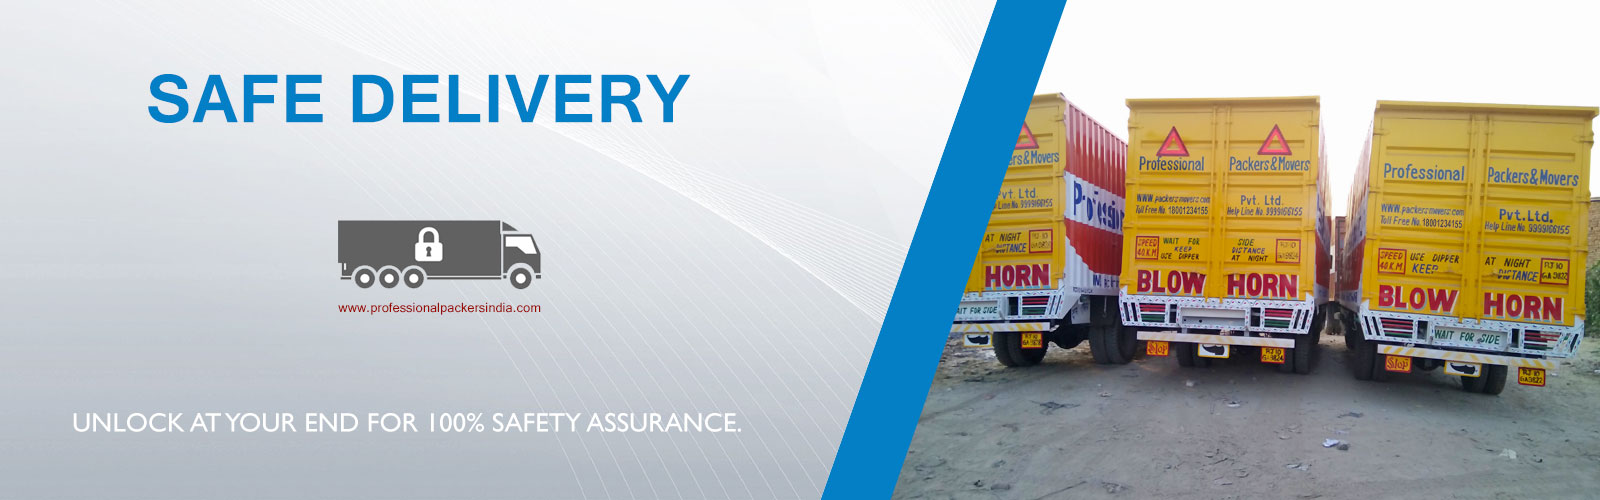 Movers Packers Baljit Vihar Delhi company move your belongings fast and in an efficient manner by integrating top-notch packaging material, dedicated staff and global-class technology.